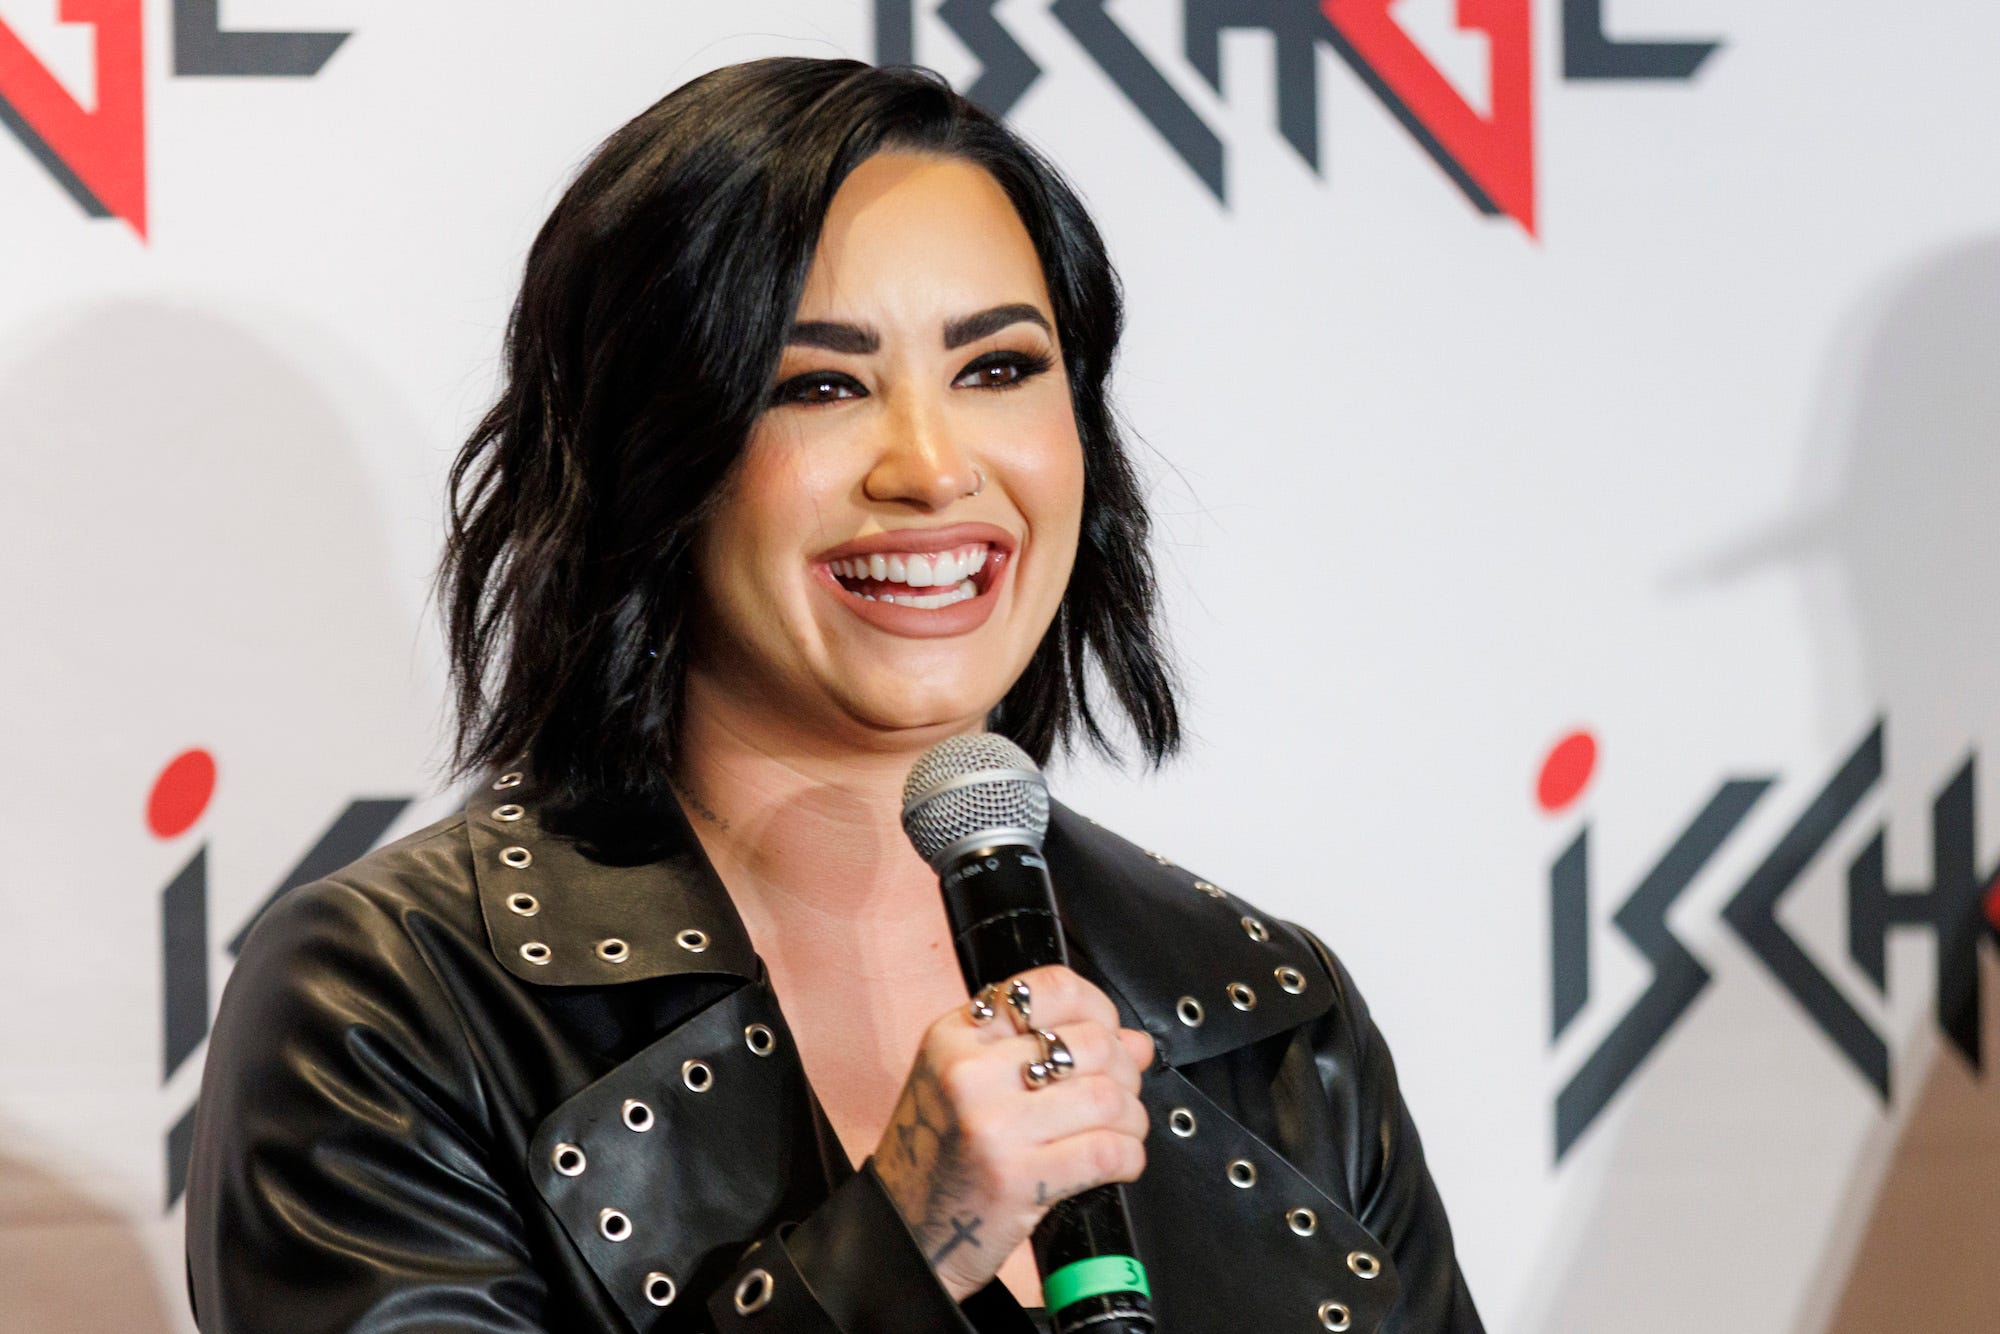 <p>Demi Lovato's directorial debut documentary will showcase "the highs and lows of growing up in the spotlight," <a href="https://deadline.com/2023/03/demi-lovato-directorial-debut-child-star-documentary-hulu-1235301556/">according to Deadline</a>.</p><p>"Child Star" is a working title for the movie.</p>